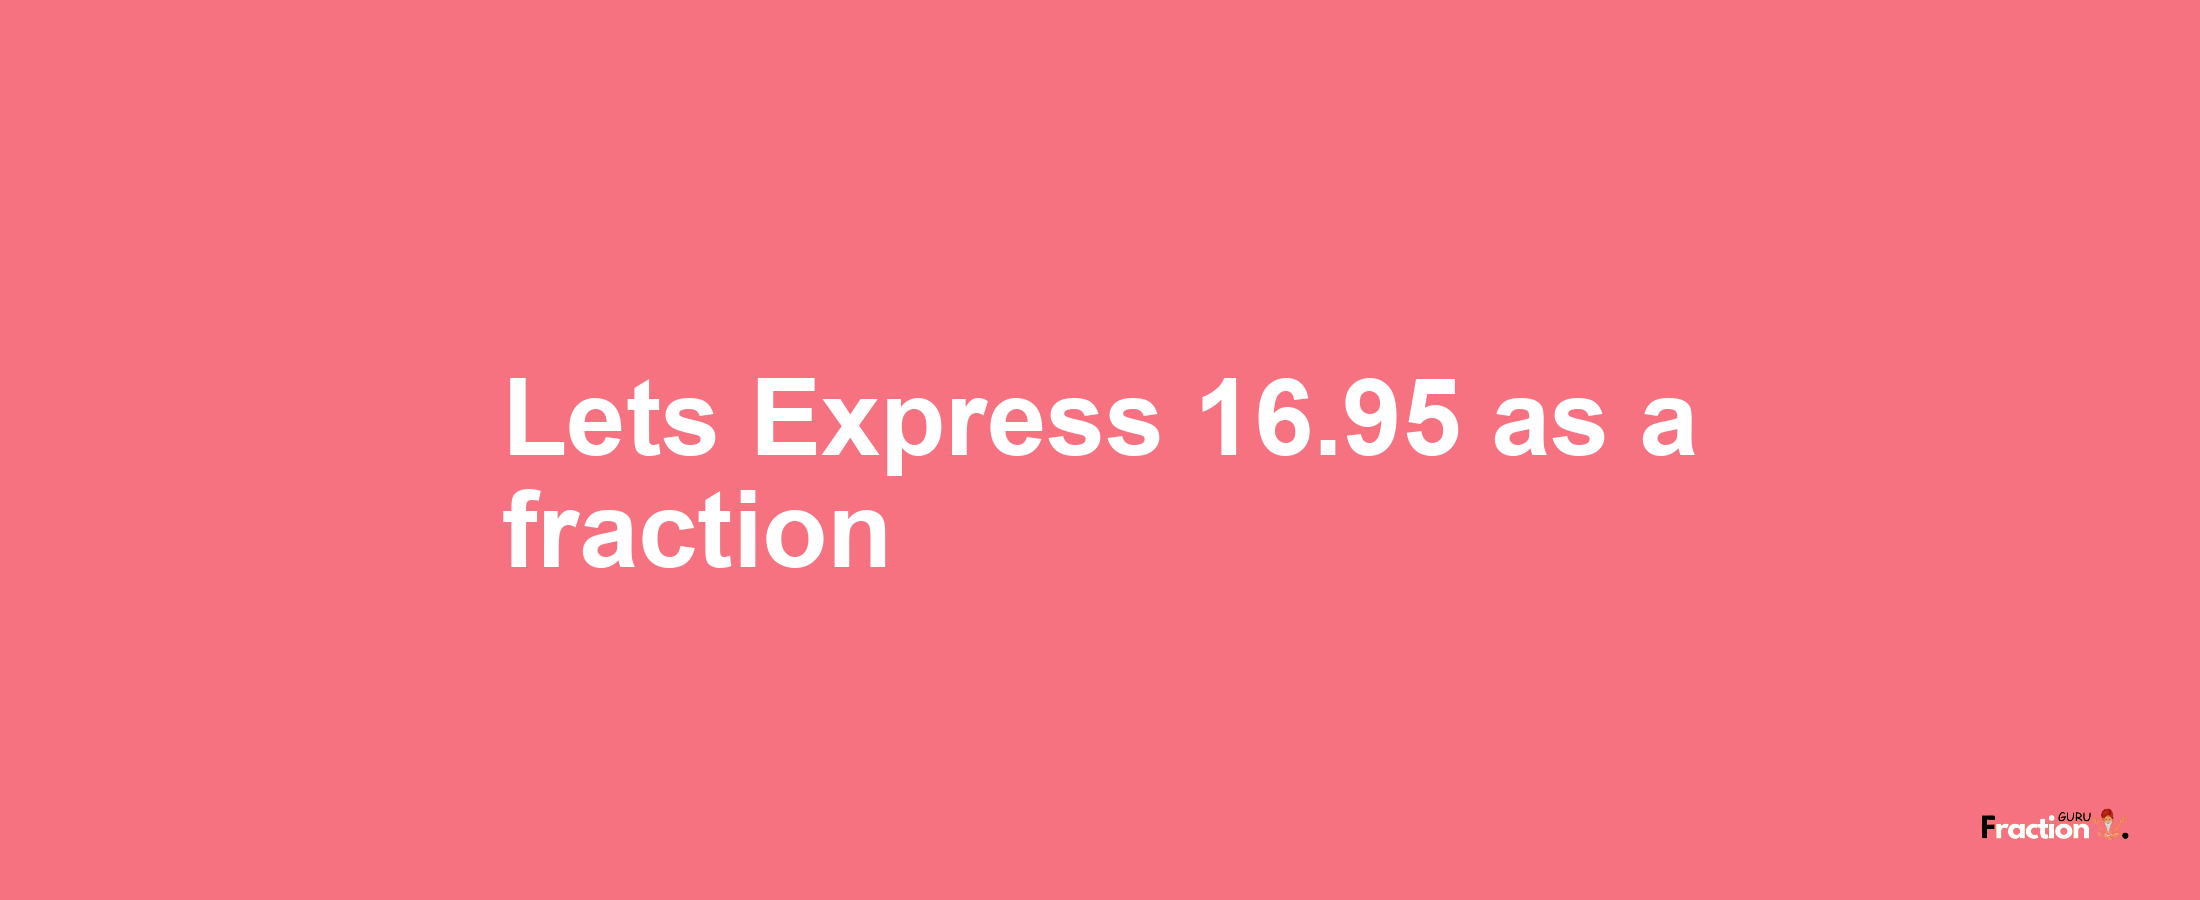 Lets Express 16.95 as afraction